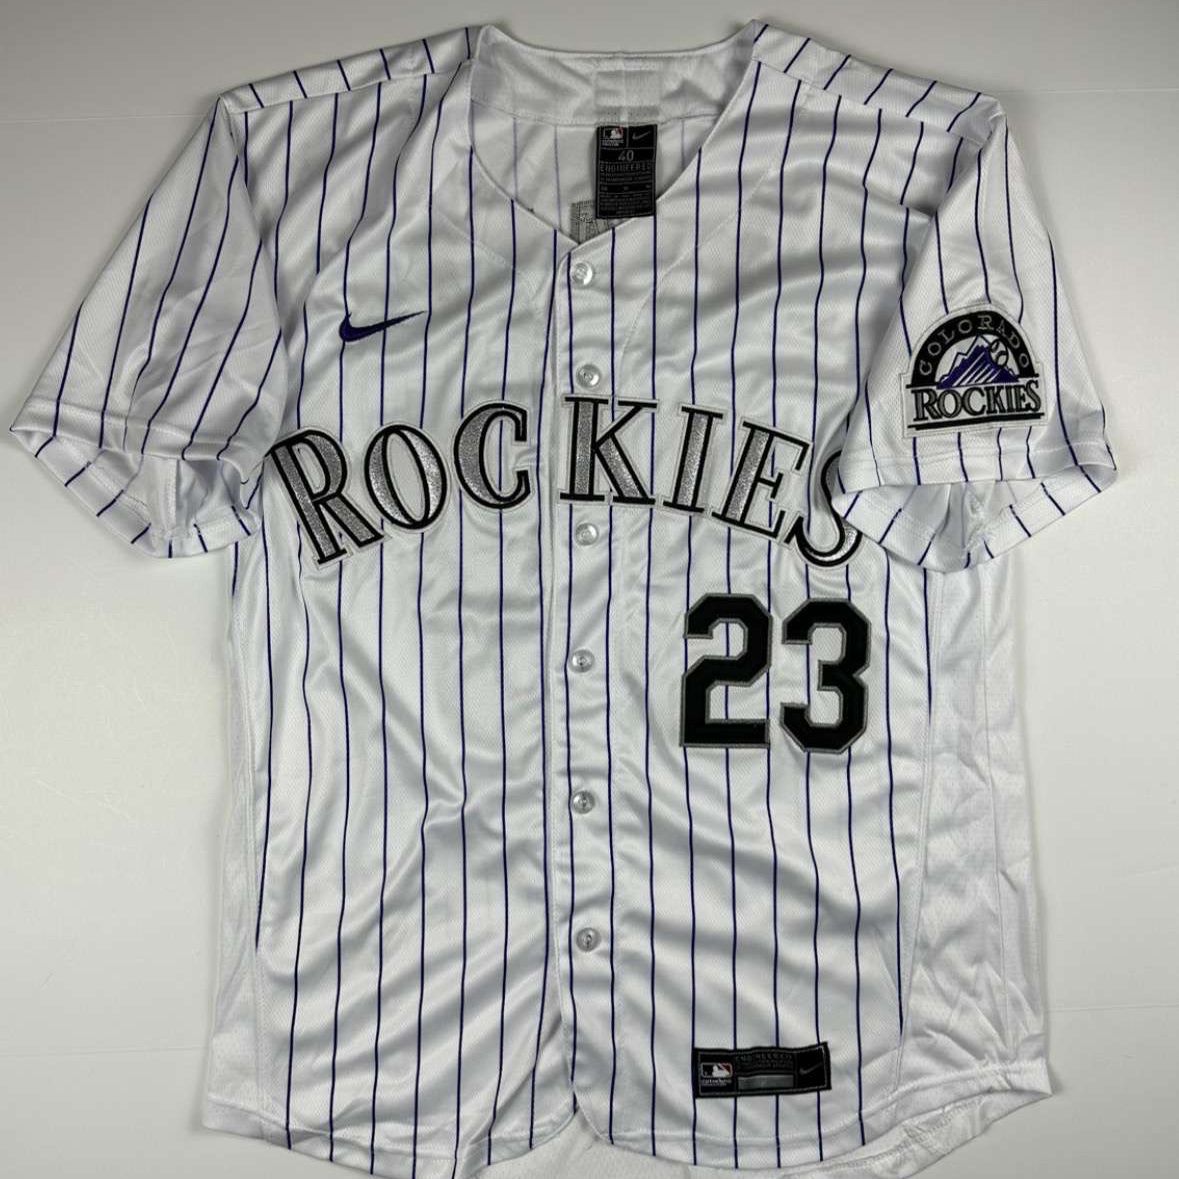 Colorado Rockies Jersey for Sale in Imperial Beach, CA - OfferUp